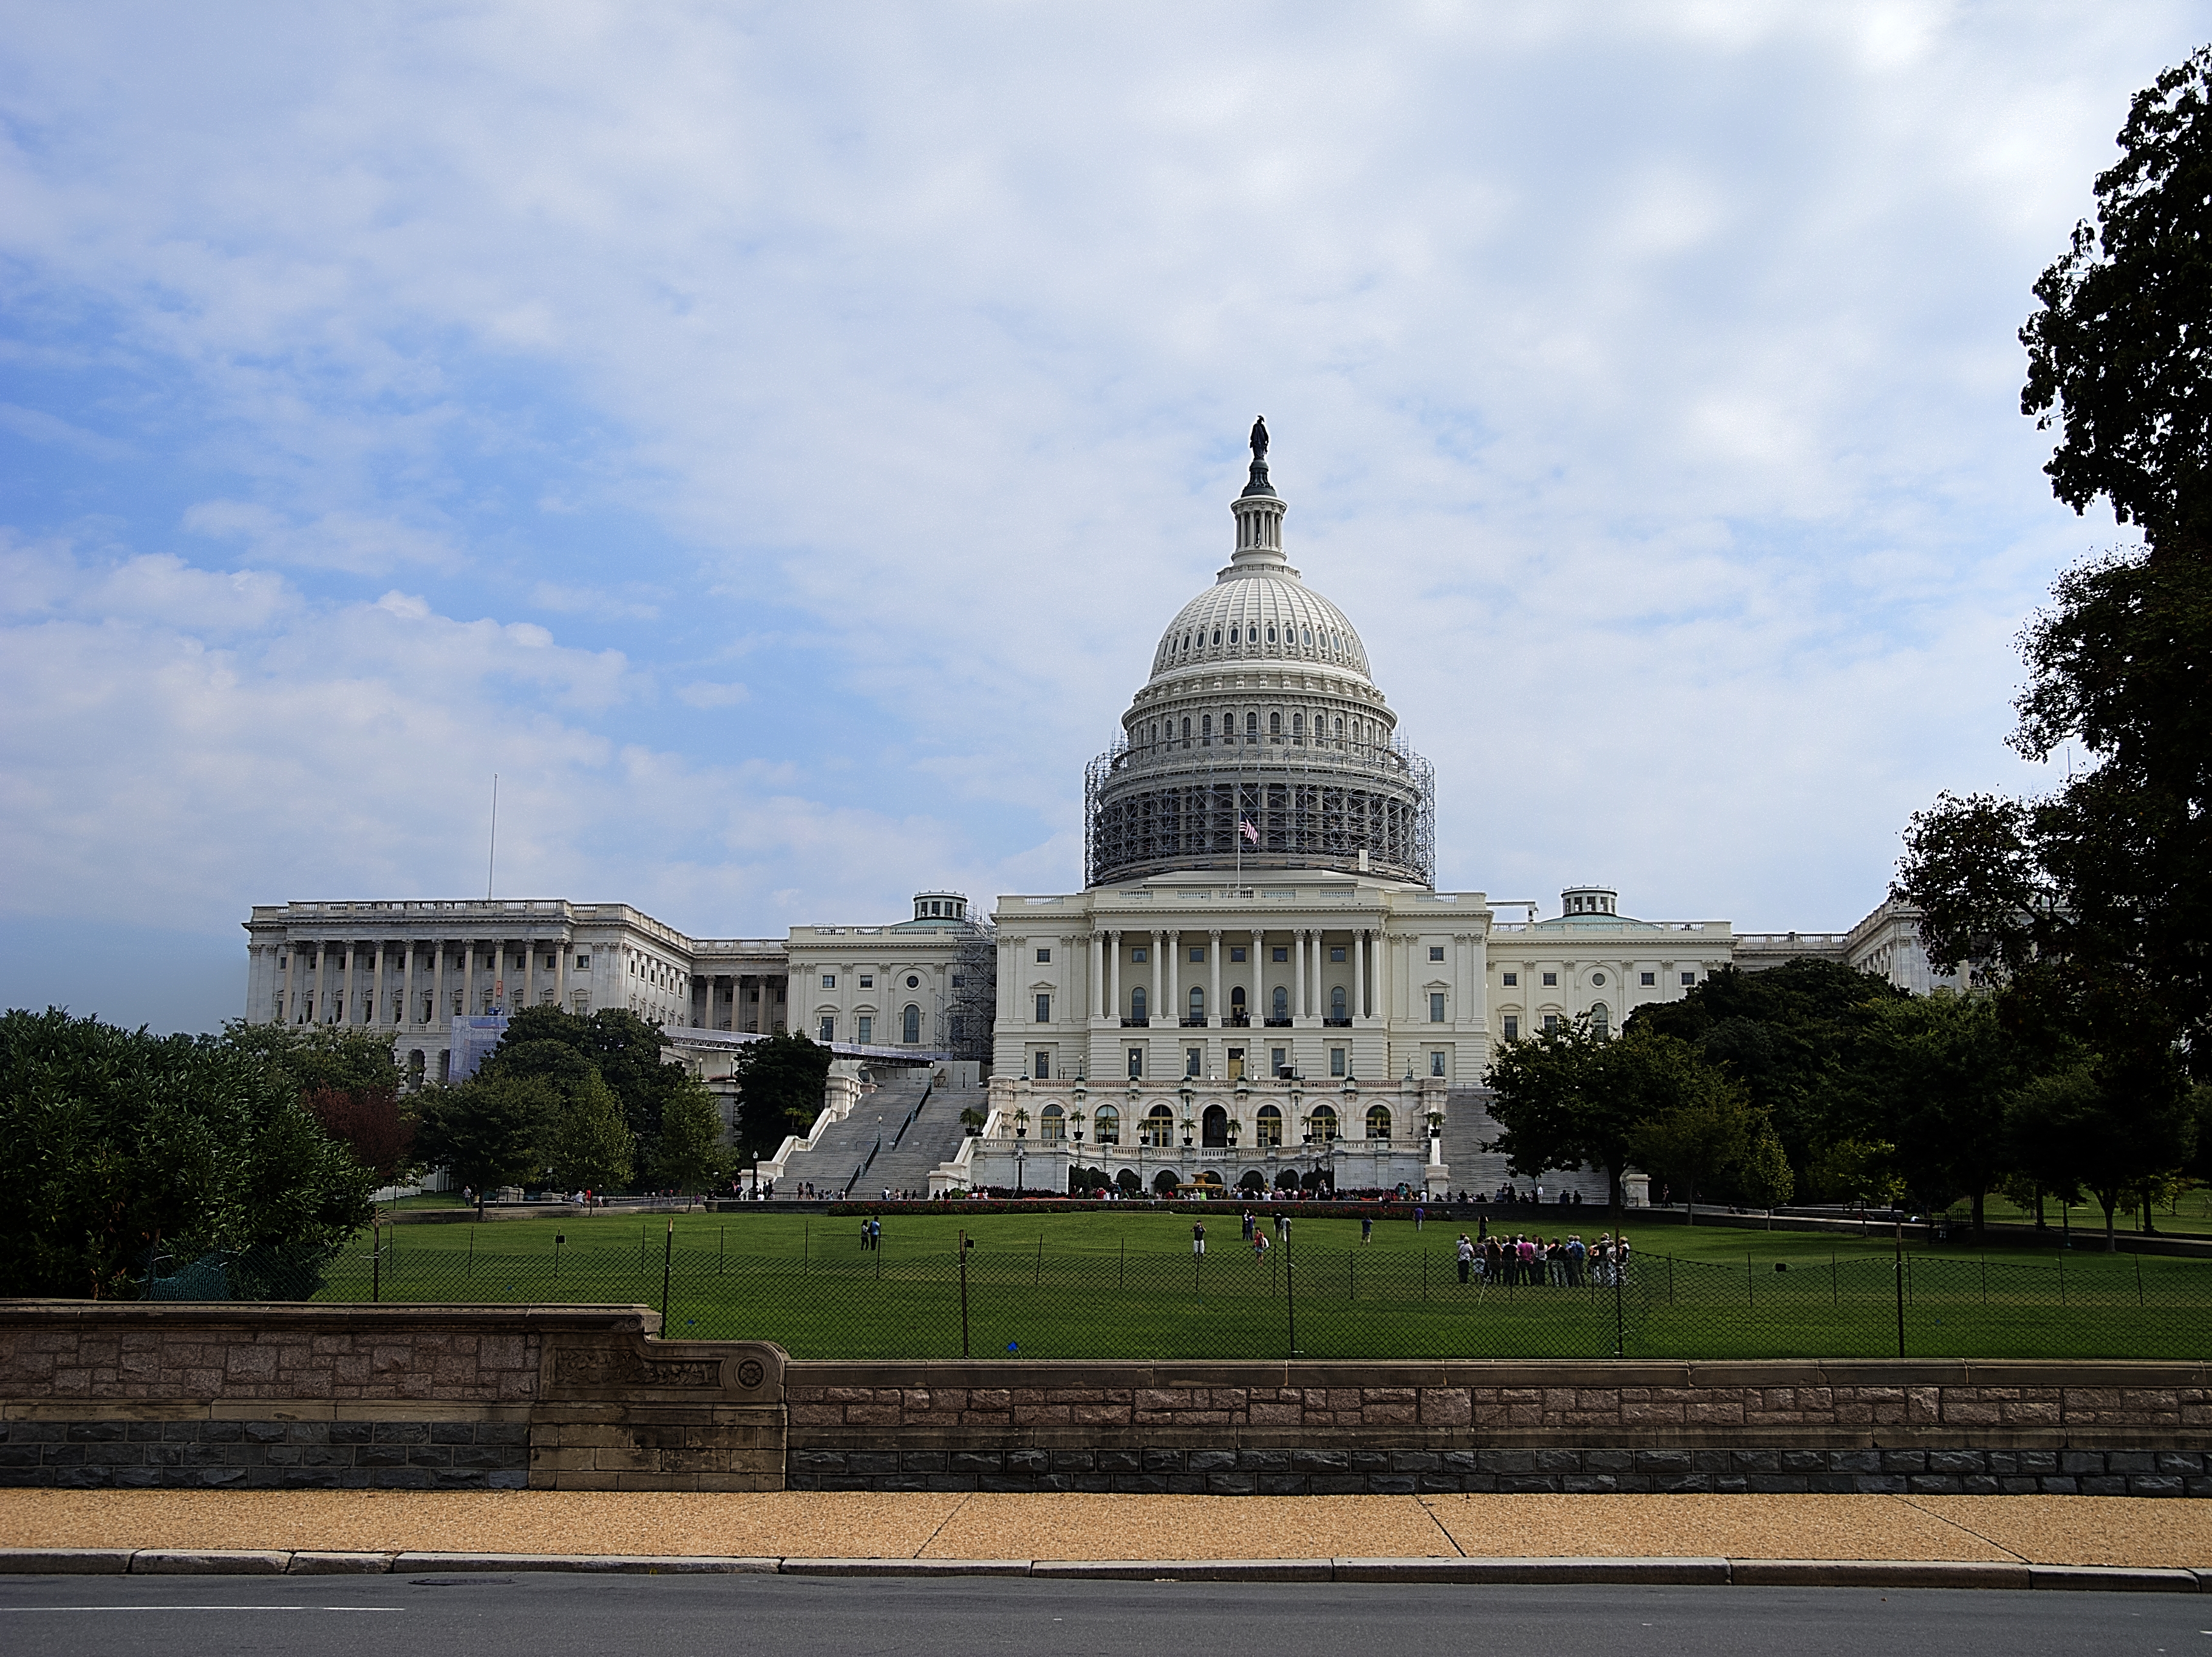 The Capitol Building – Photography by CyberShutterbug